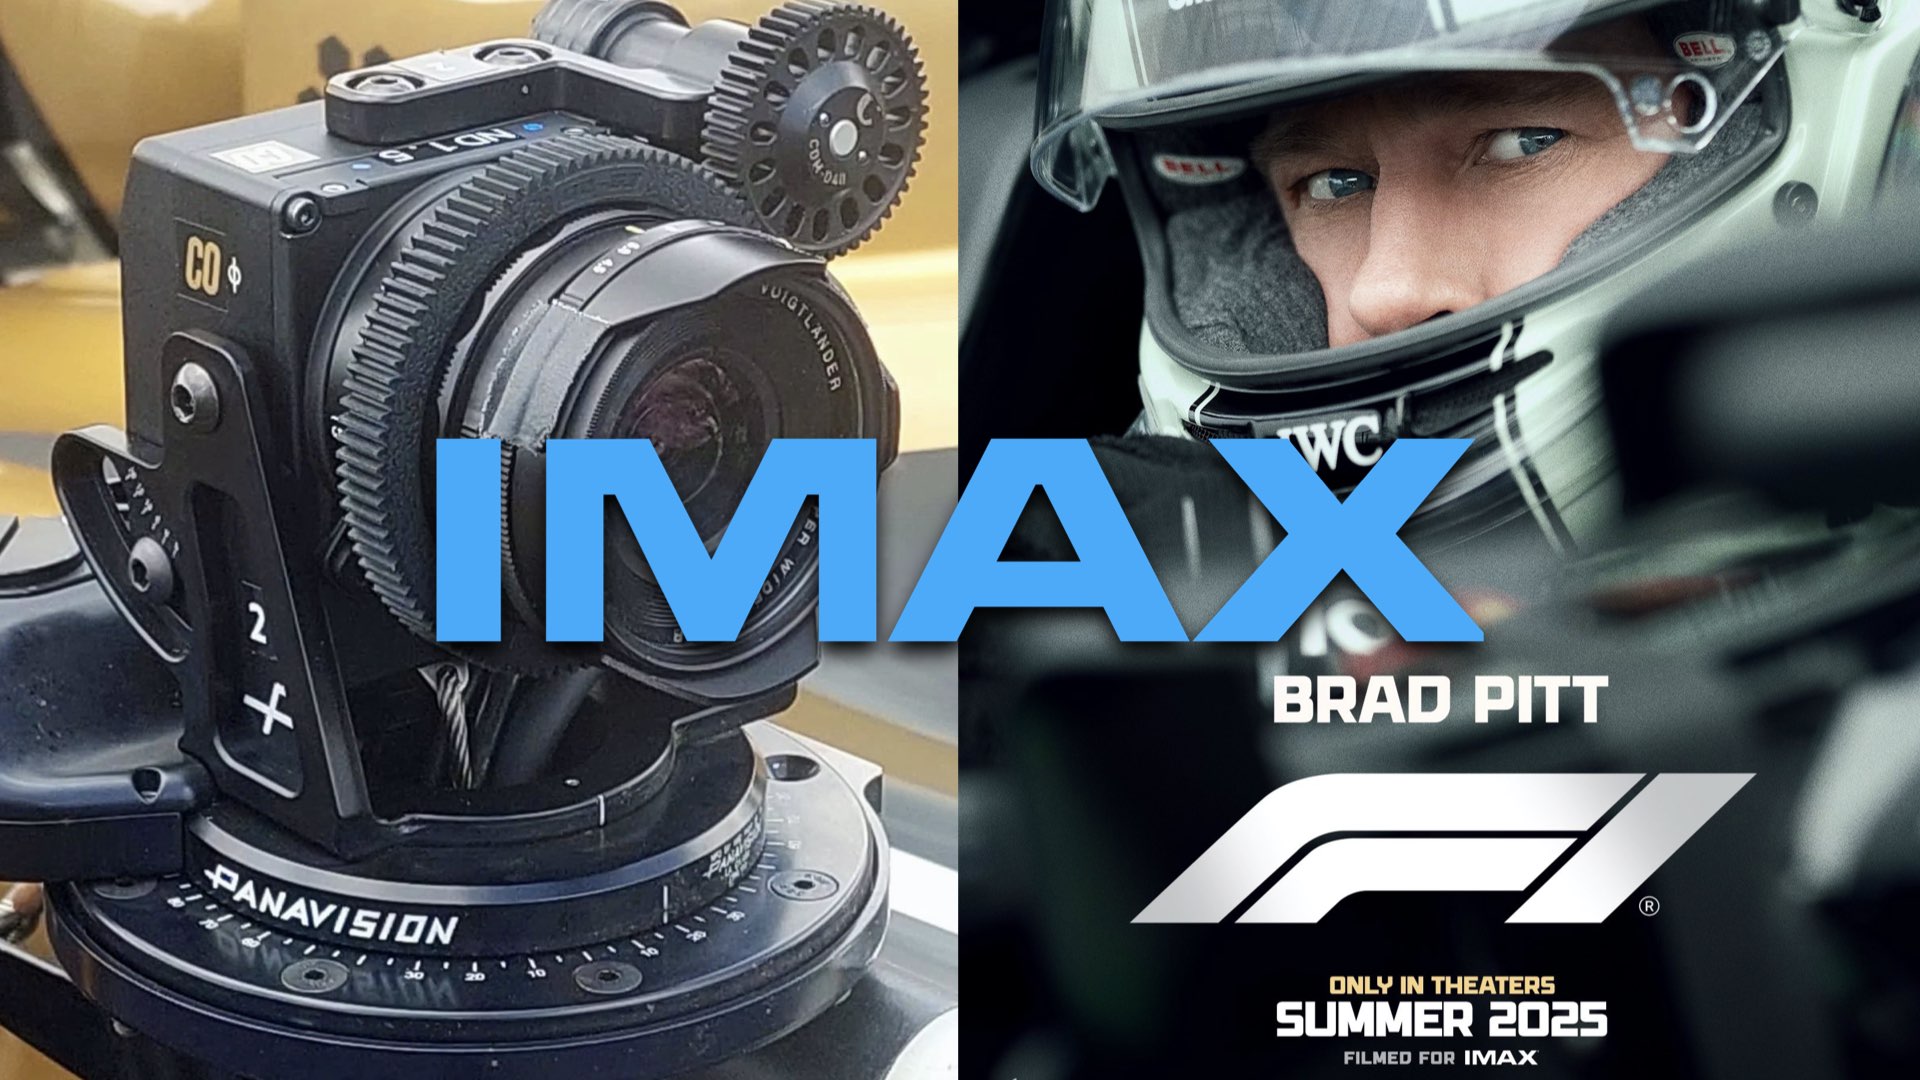 F1 teaser released: Filmed for IMAX with an unknown Sony Action Cinema camera